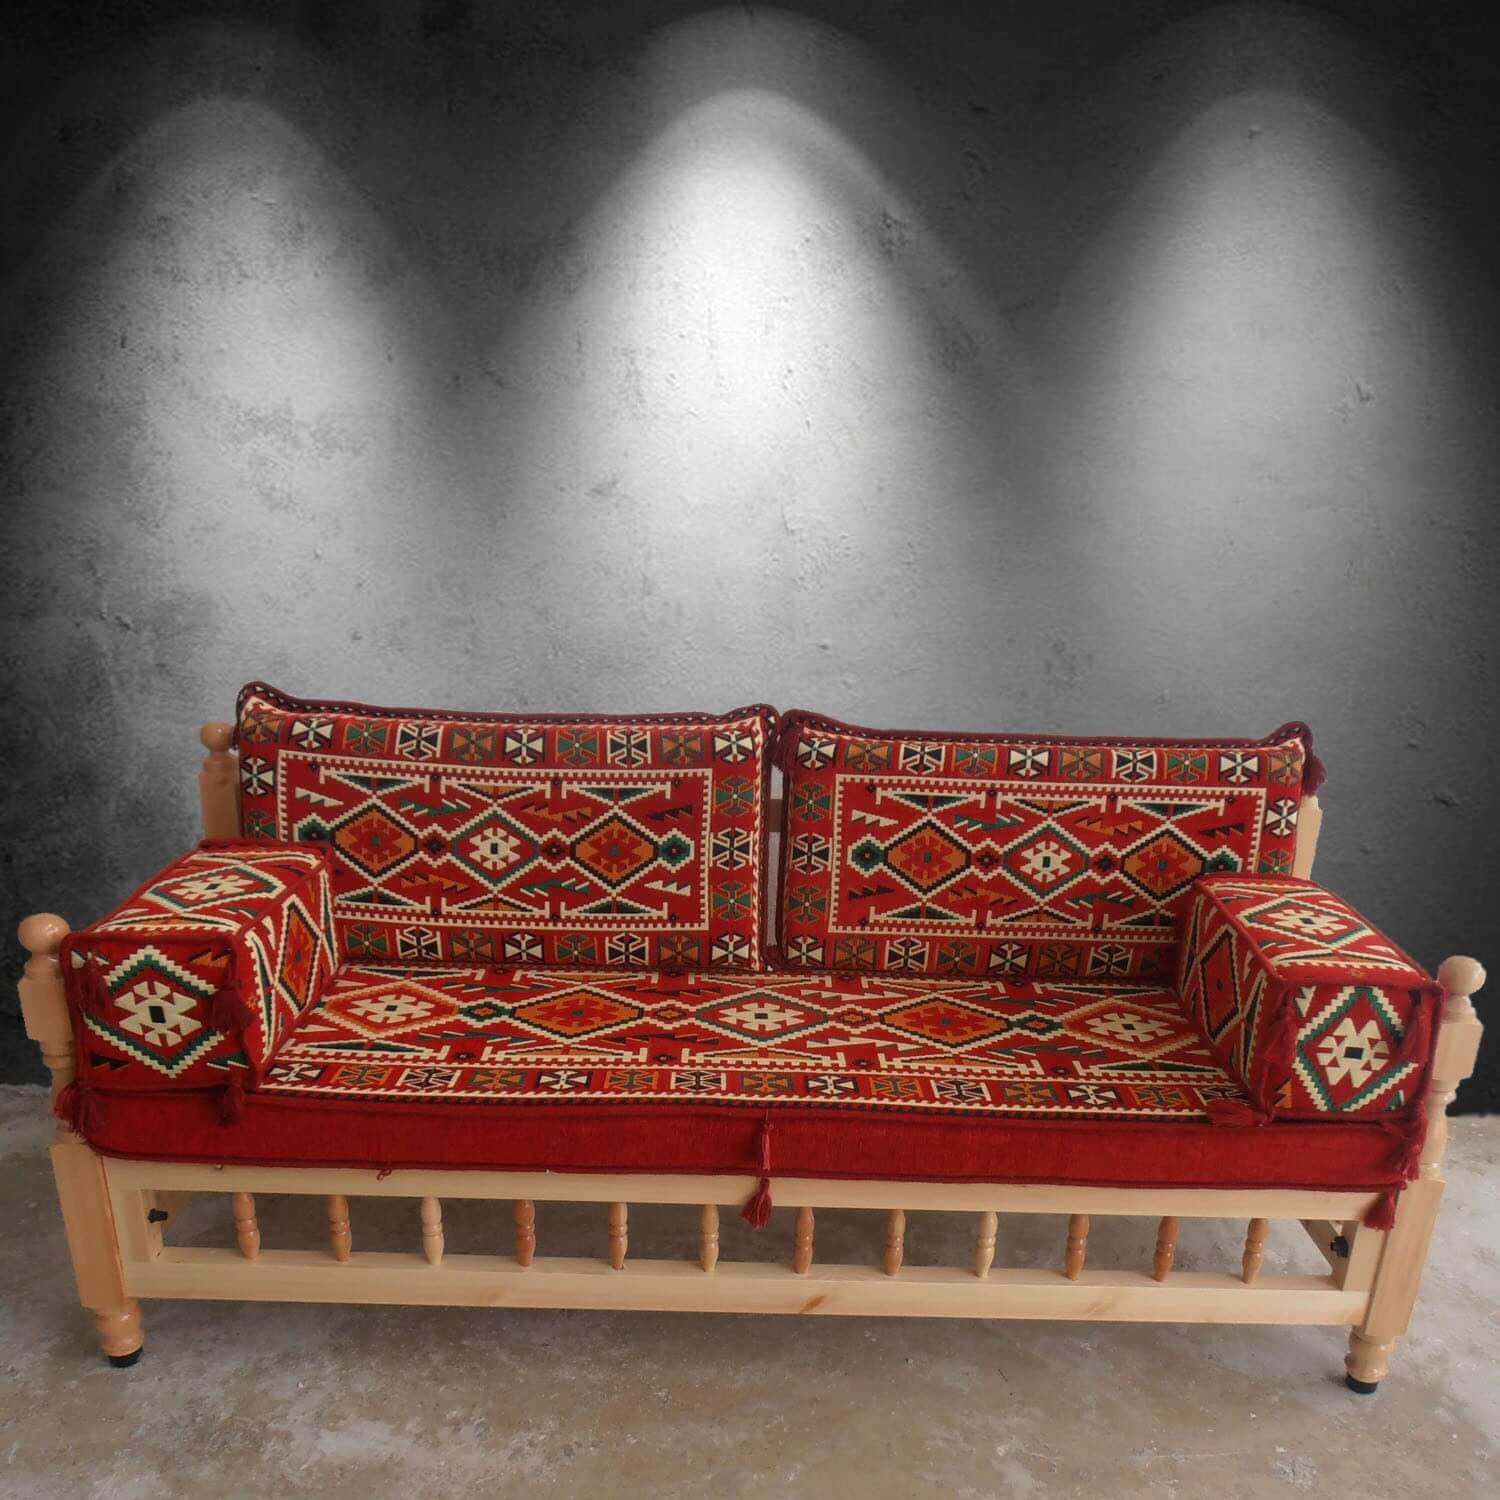 Three seater wooden bench with cushions